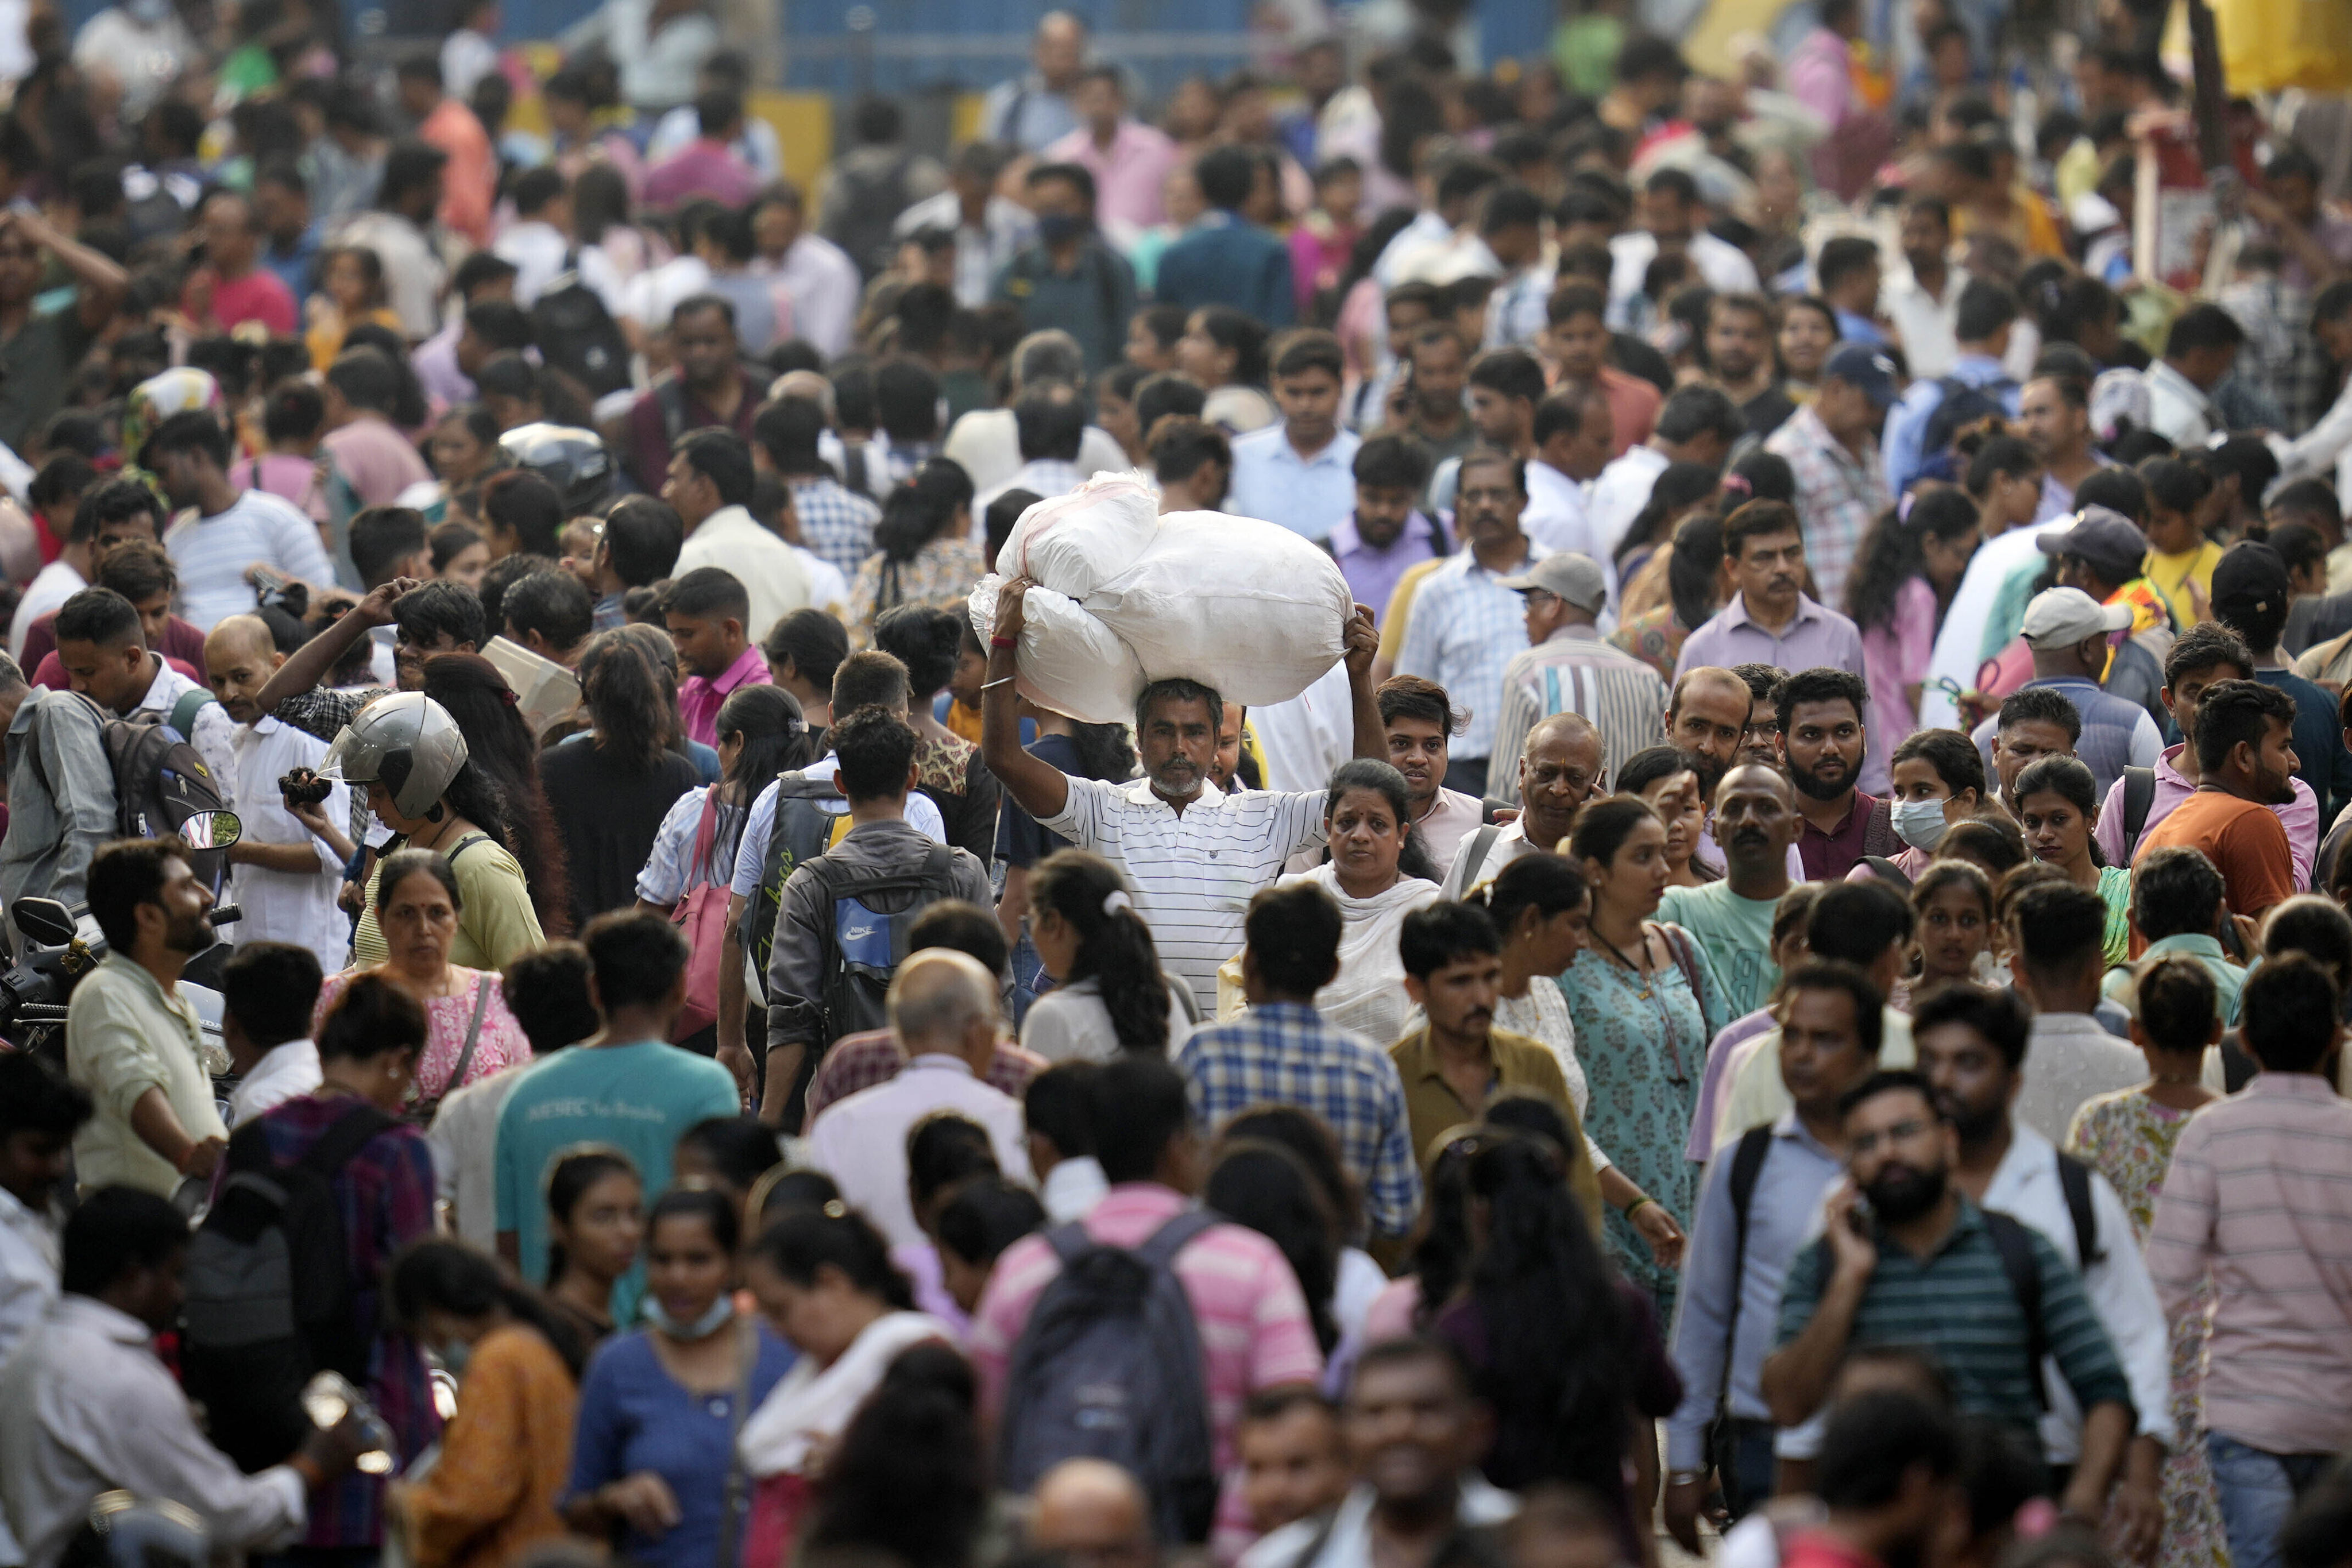 People throng a market place in Mumbai on April 24. The United Nations says India will become the world’s most populous country this year as it eclipses an ageing China, though constant revisions to its population estimates have eroded the UN population agency’s credibility among some observers. Photo: AP